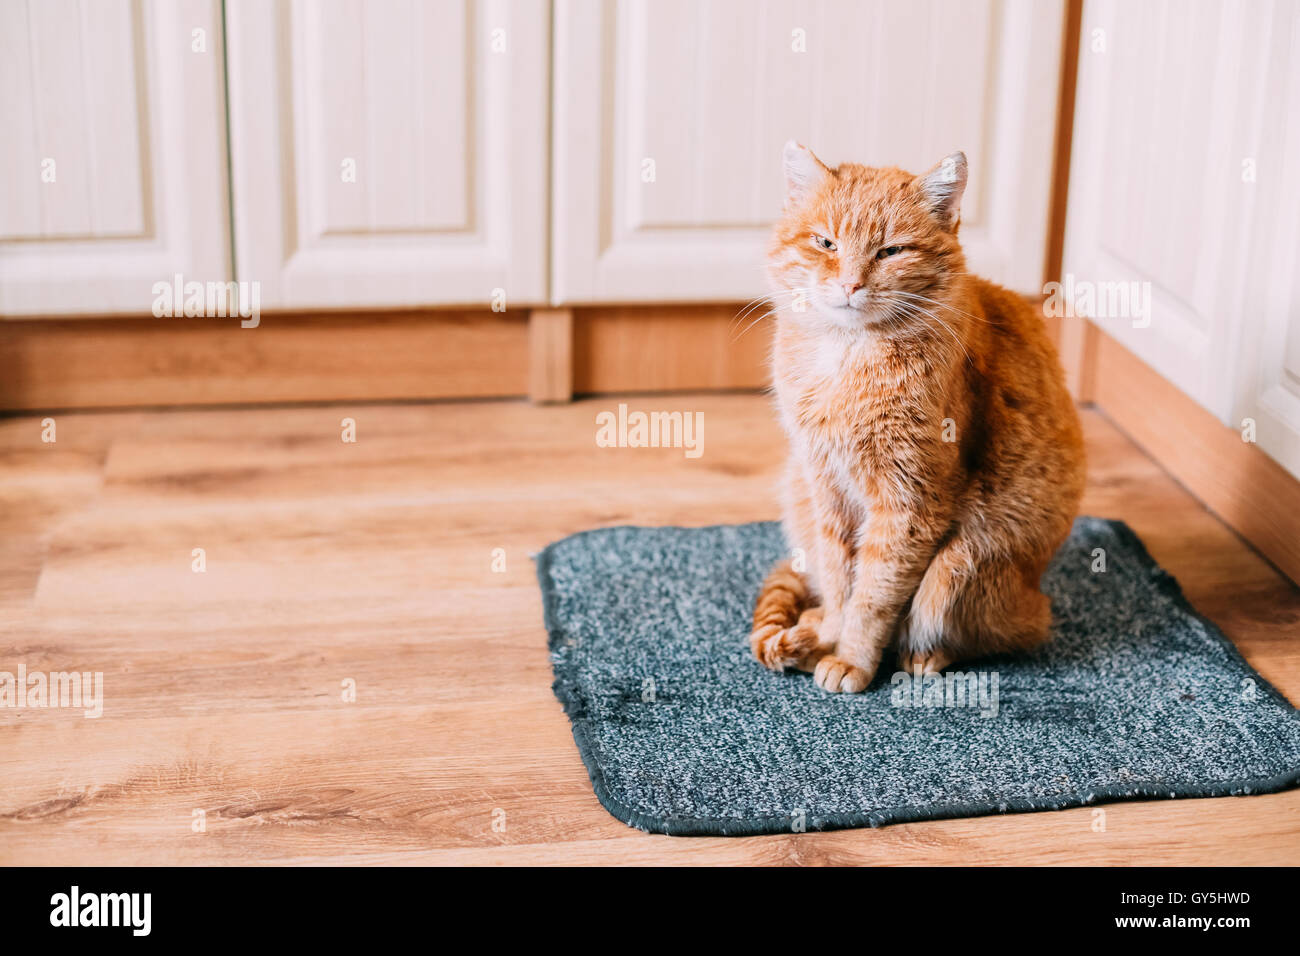 Peaceful Red Cat Sit In His Bed On Laminate Floor. Stock Photo